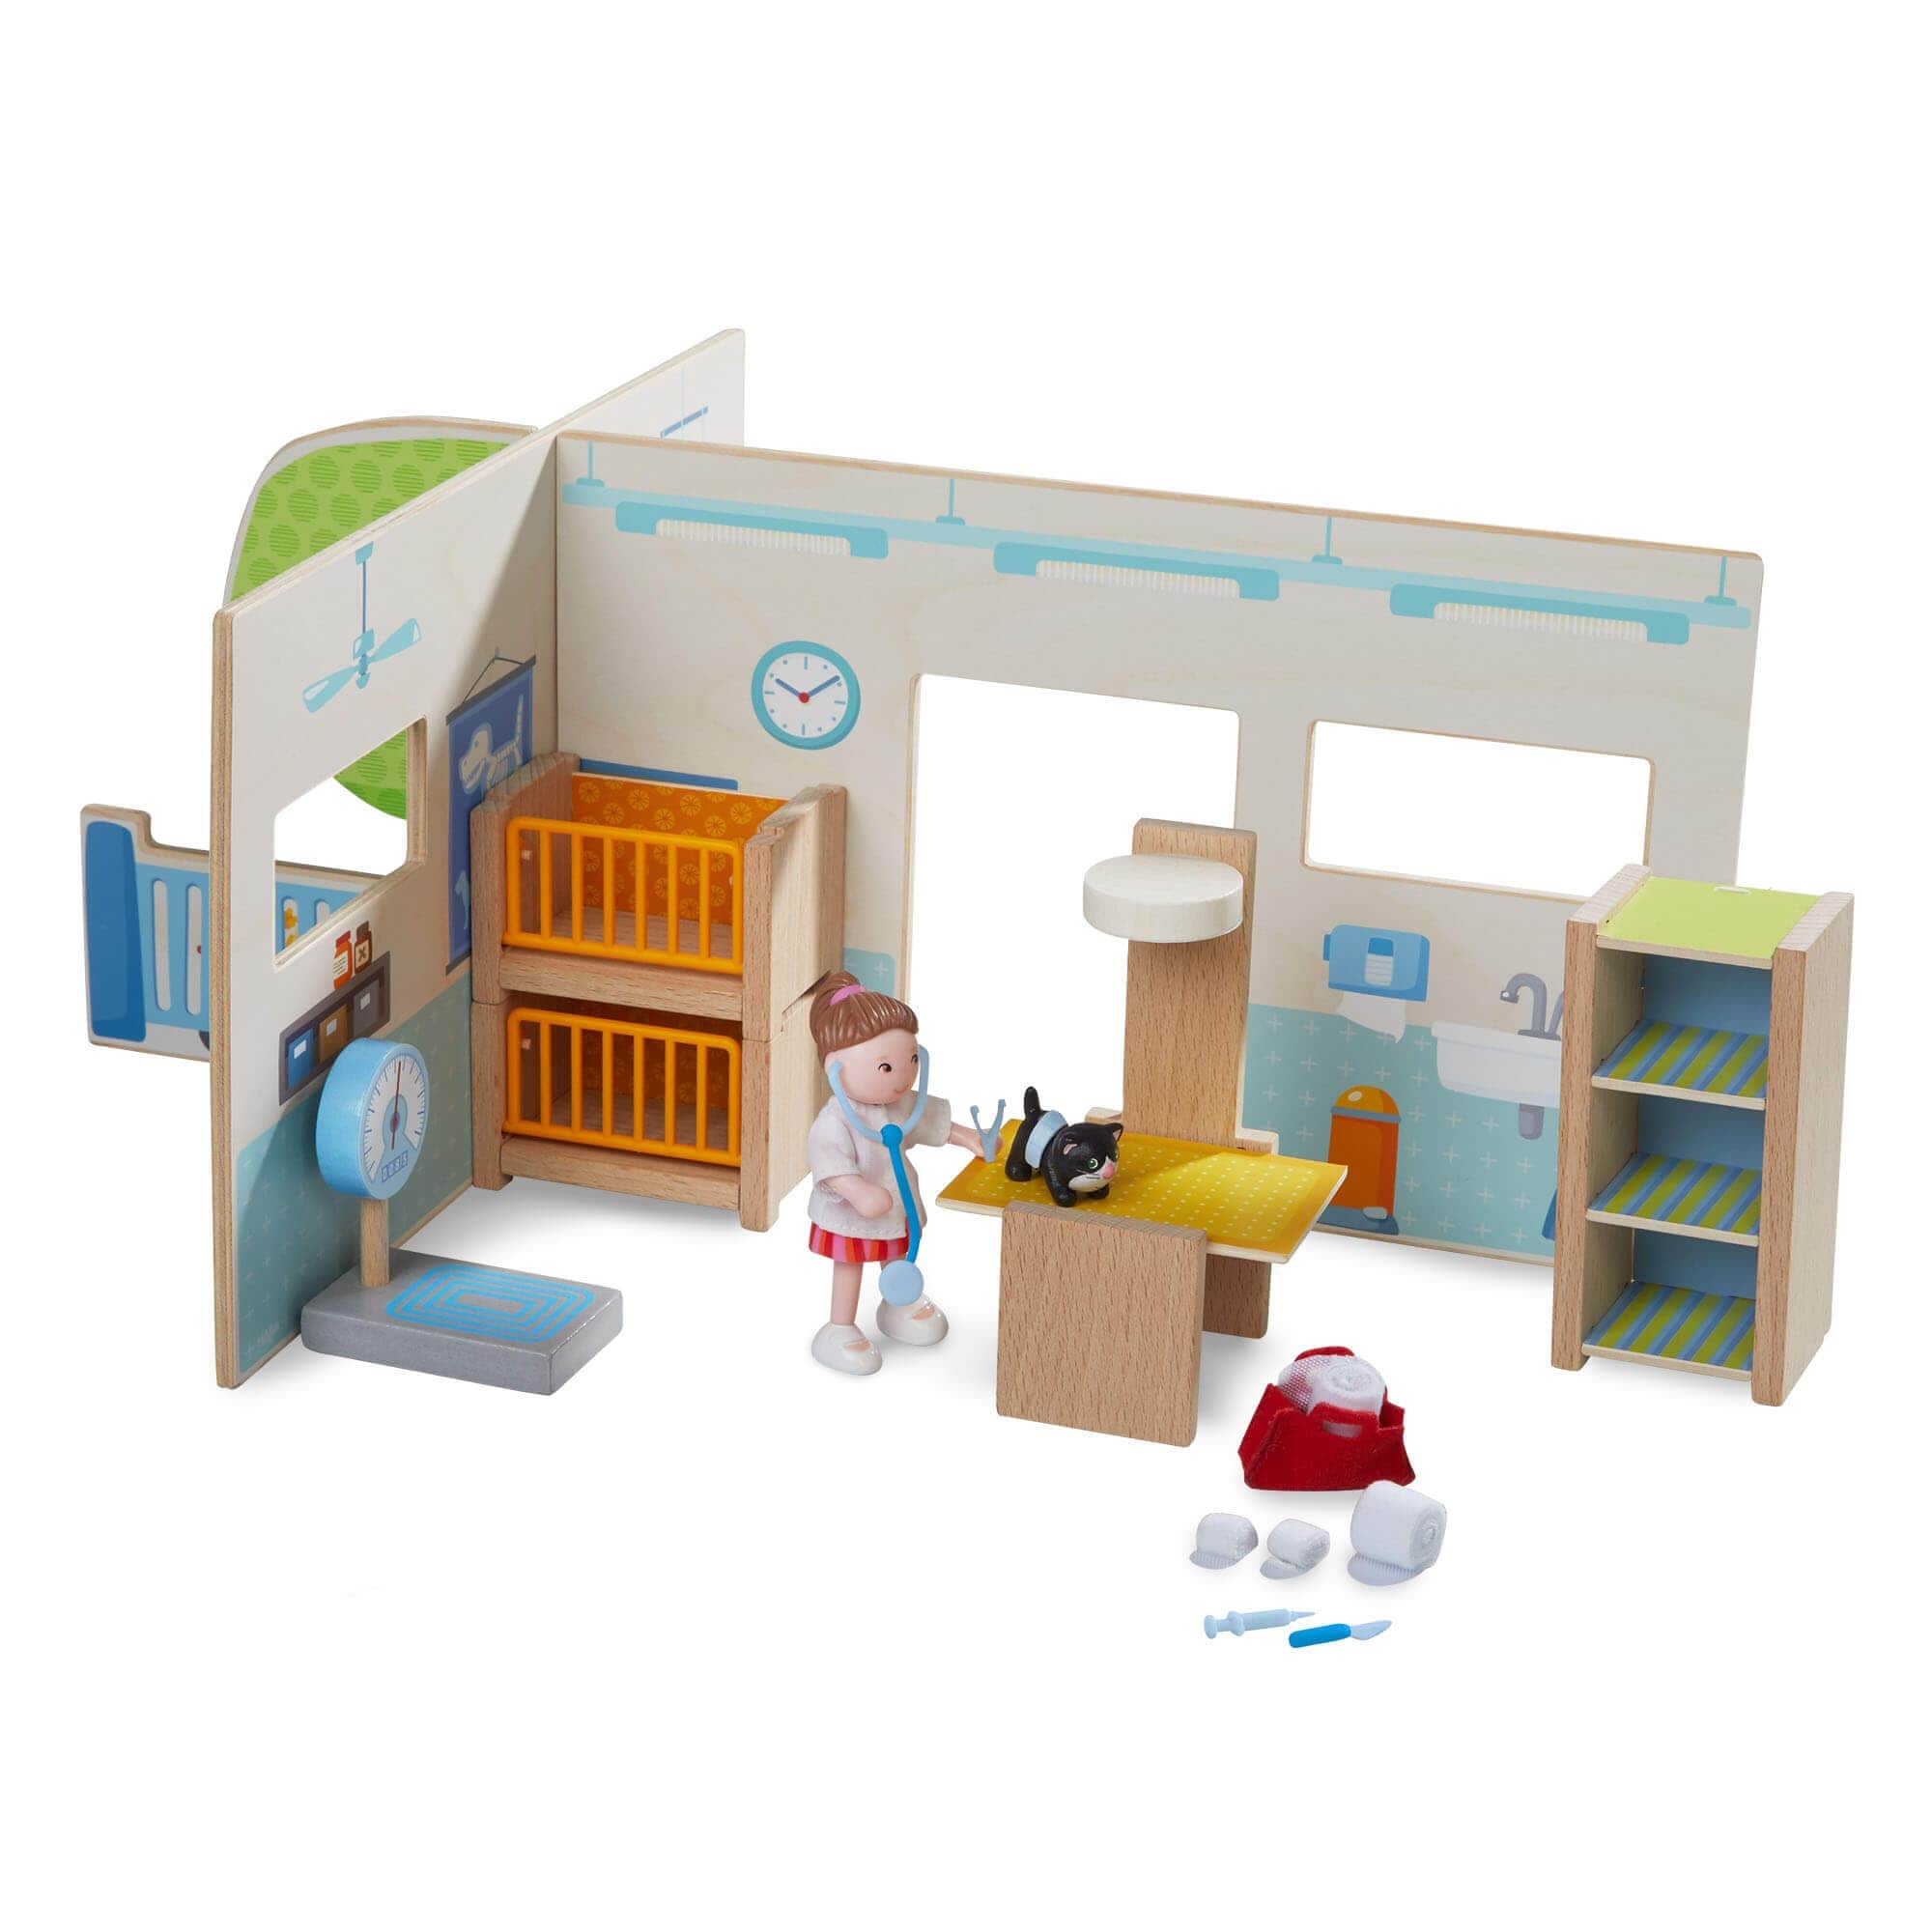 HABA USA Little Friend Buildings Little Friends Vet Clinic Play Set with Rebecca Doll